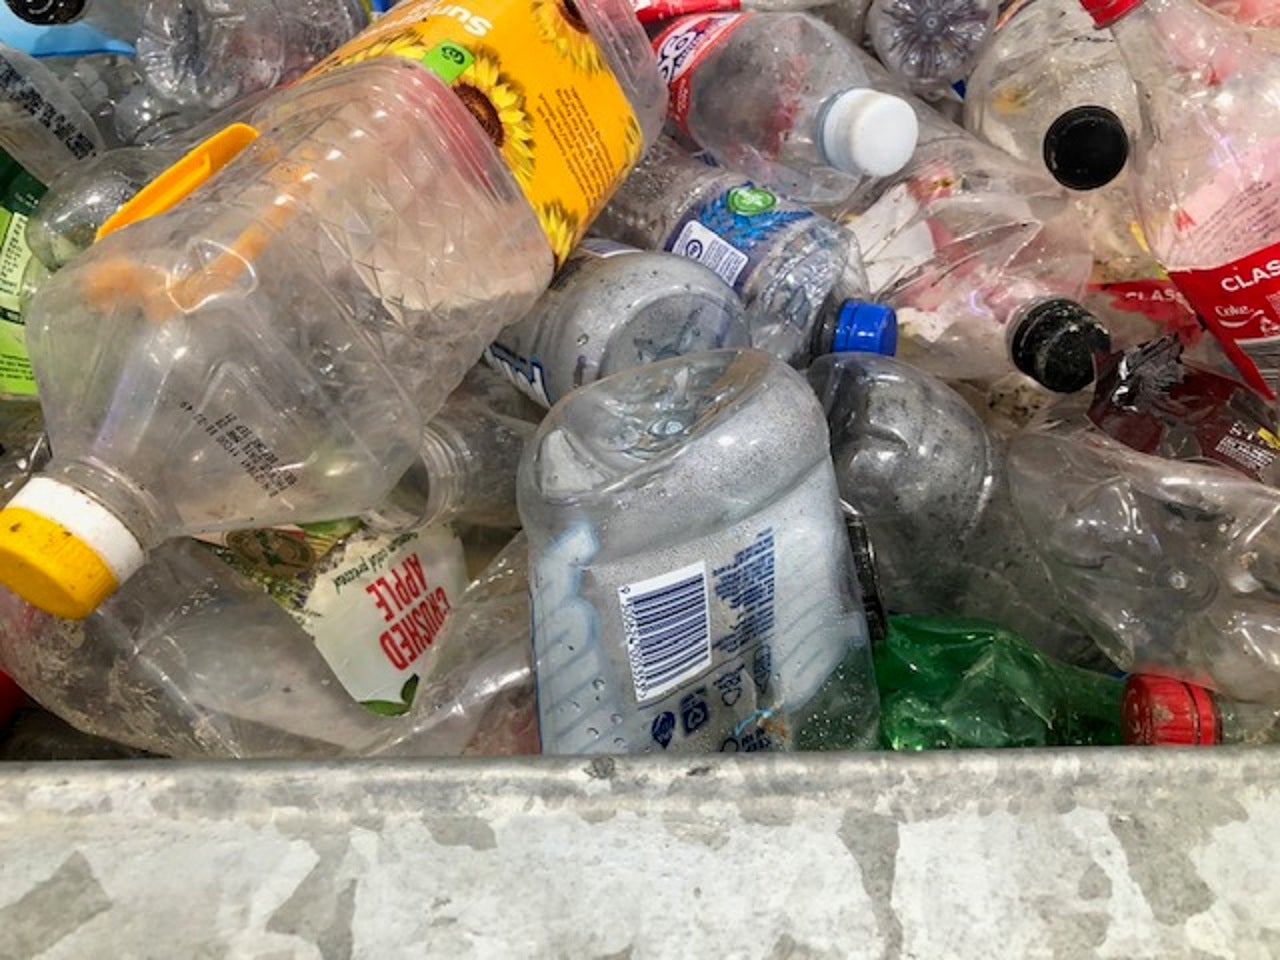 Auckland Council supports phase-out of single-use plastics